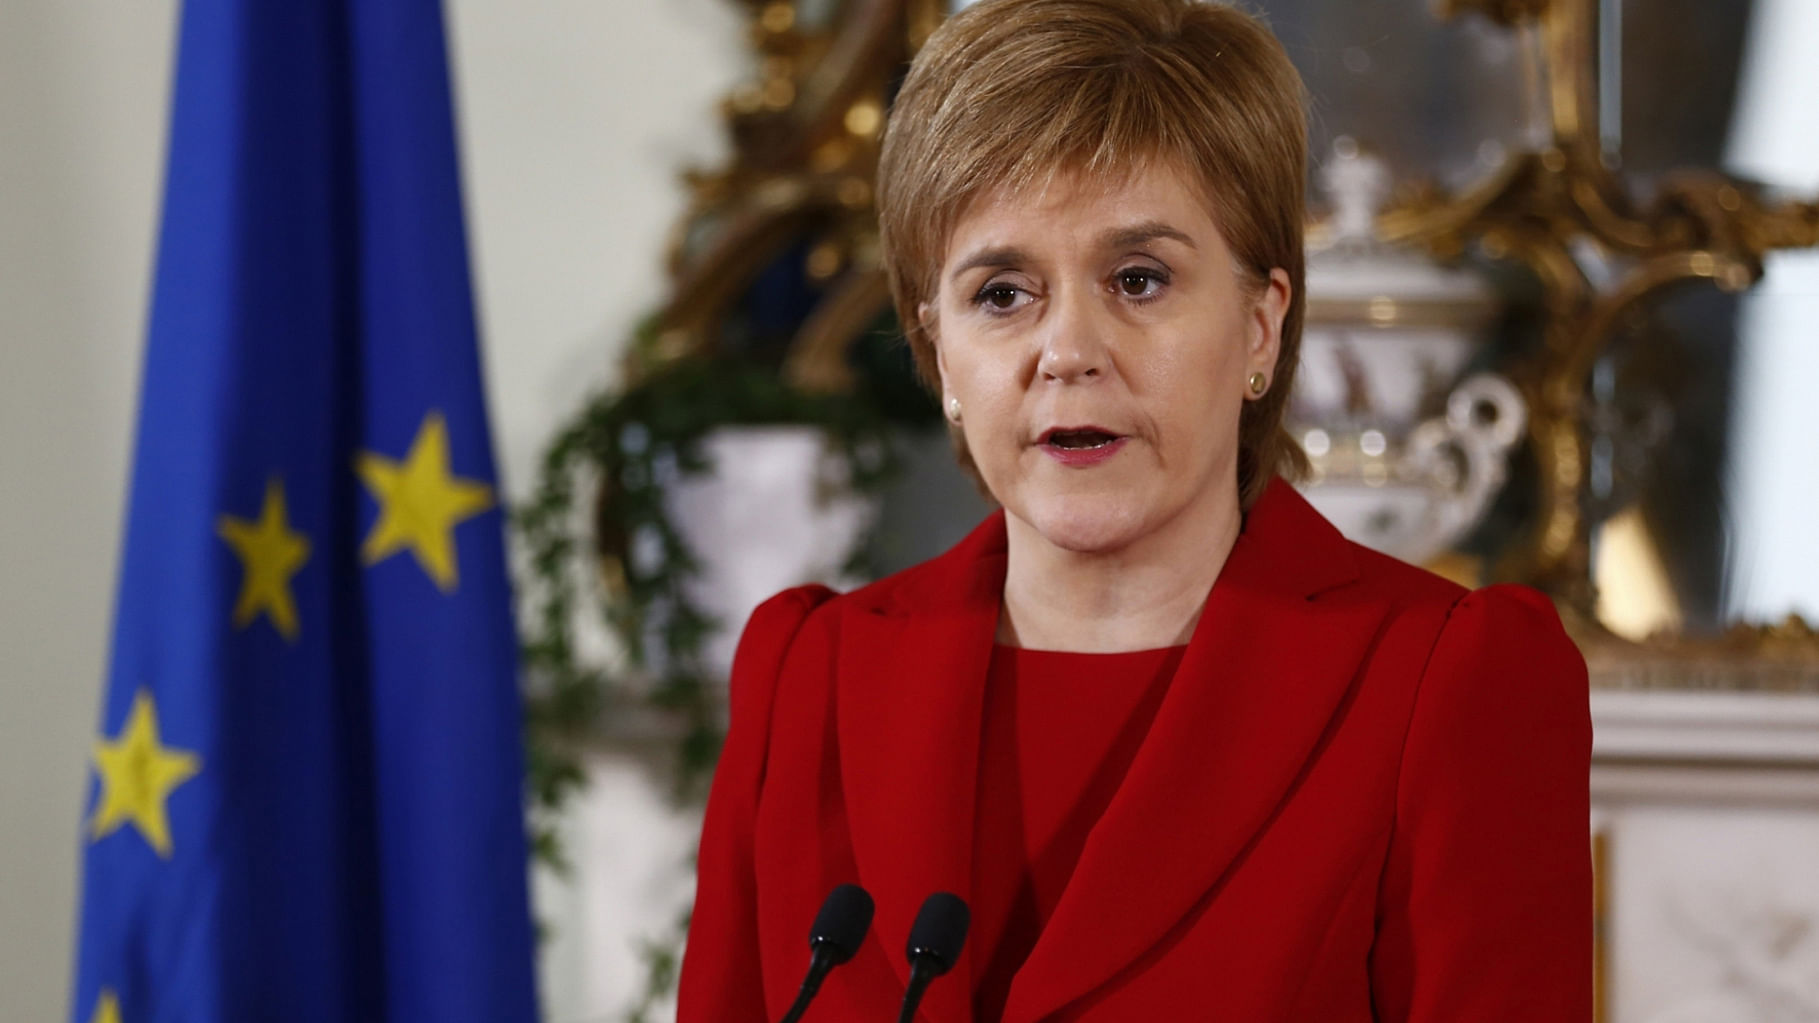 
On Tuesday, Scotland’s devolved parliament voted to hold a referendum on secession in 2018 or 2019. (Photo: IANS)